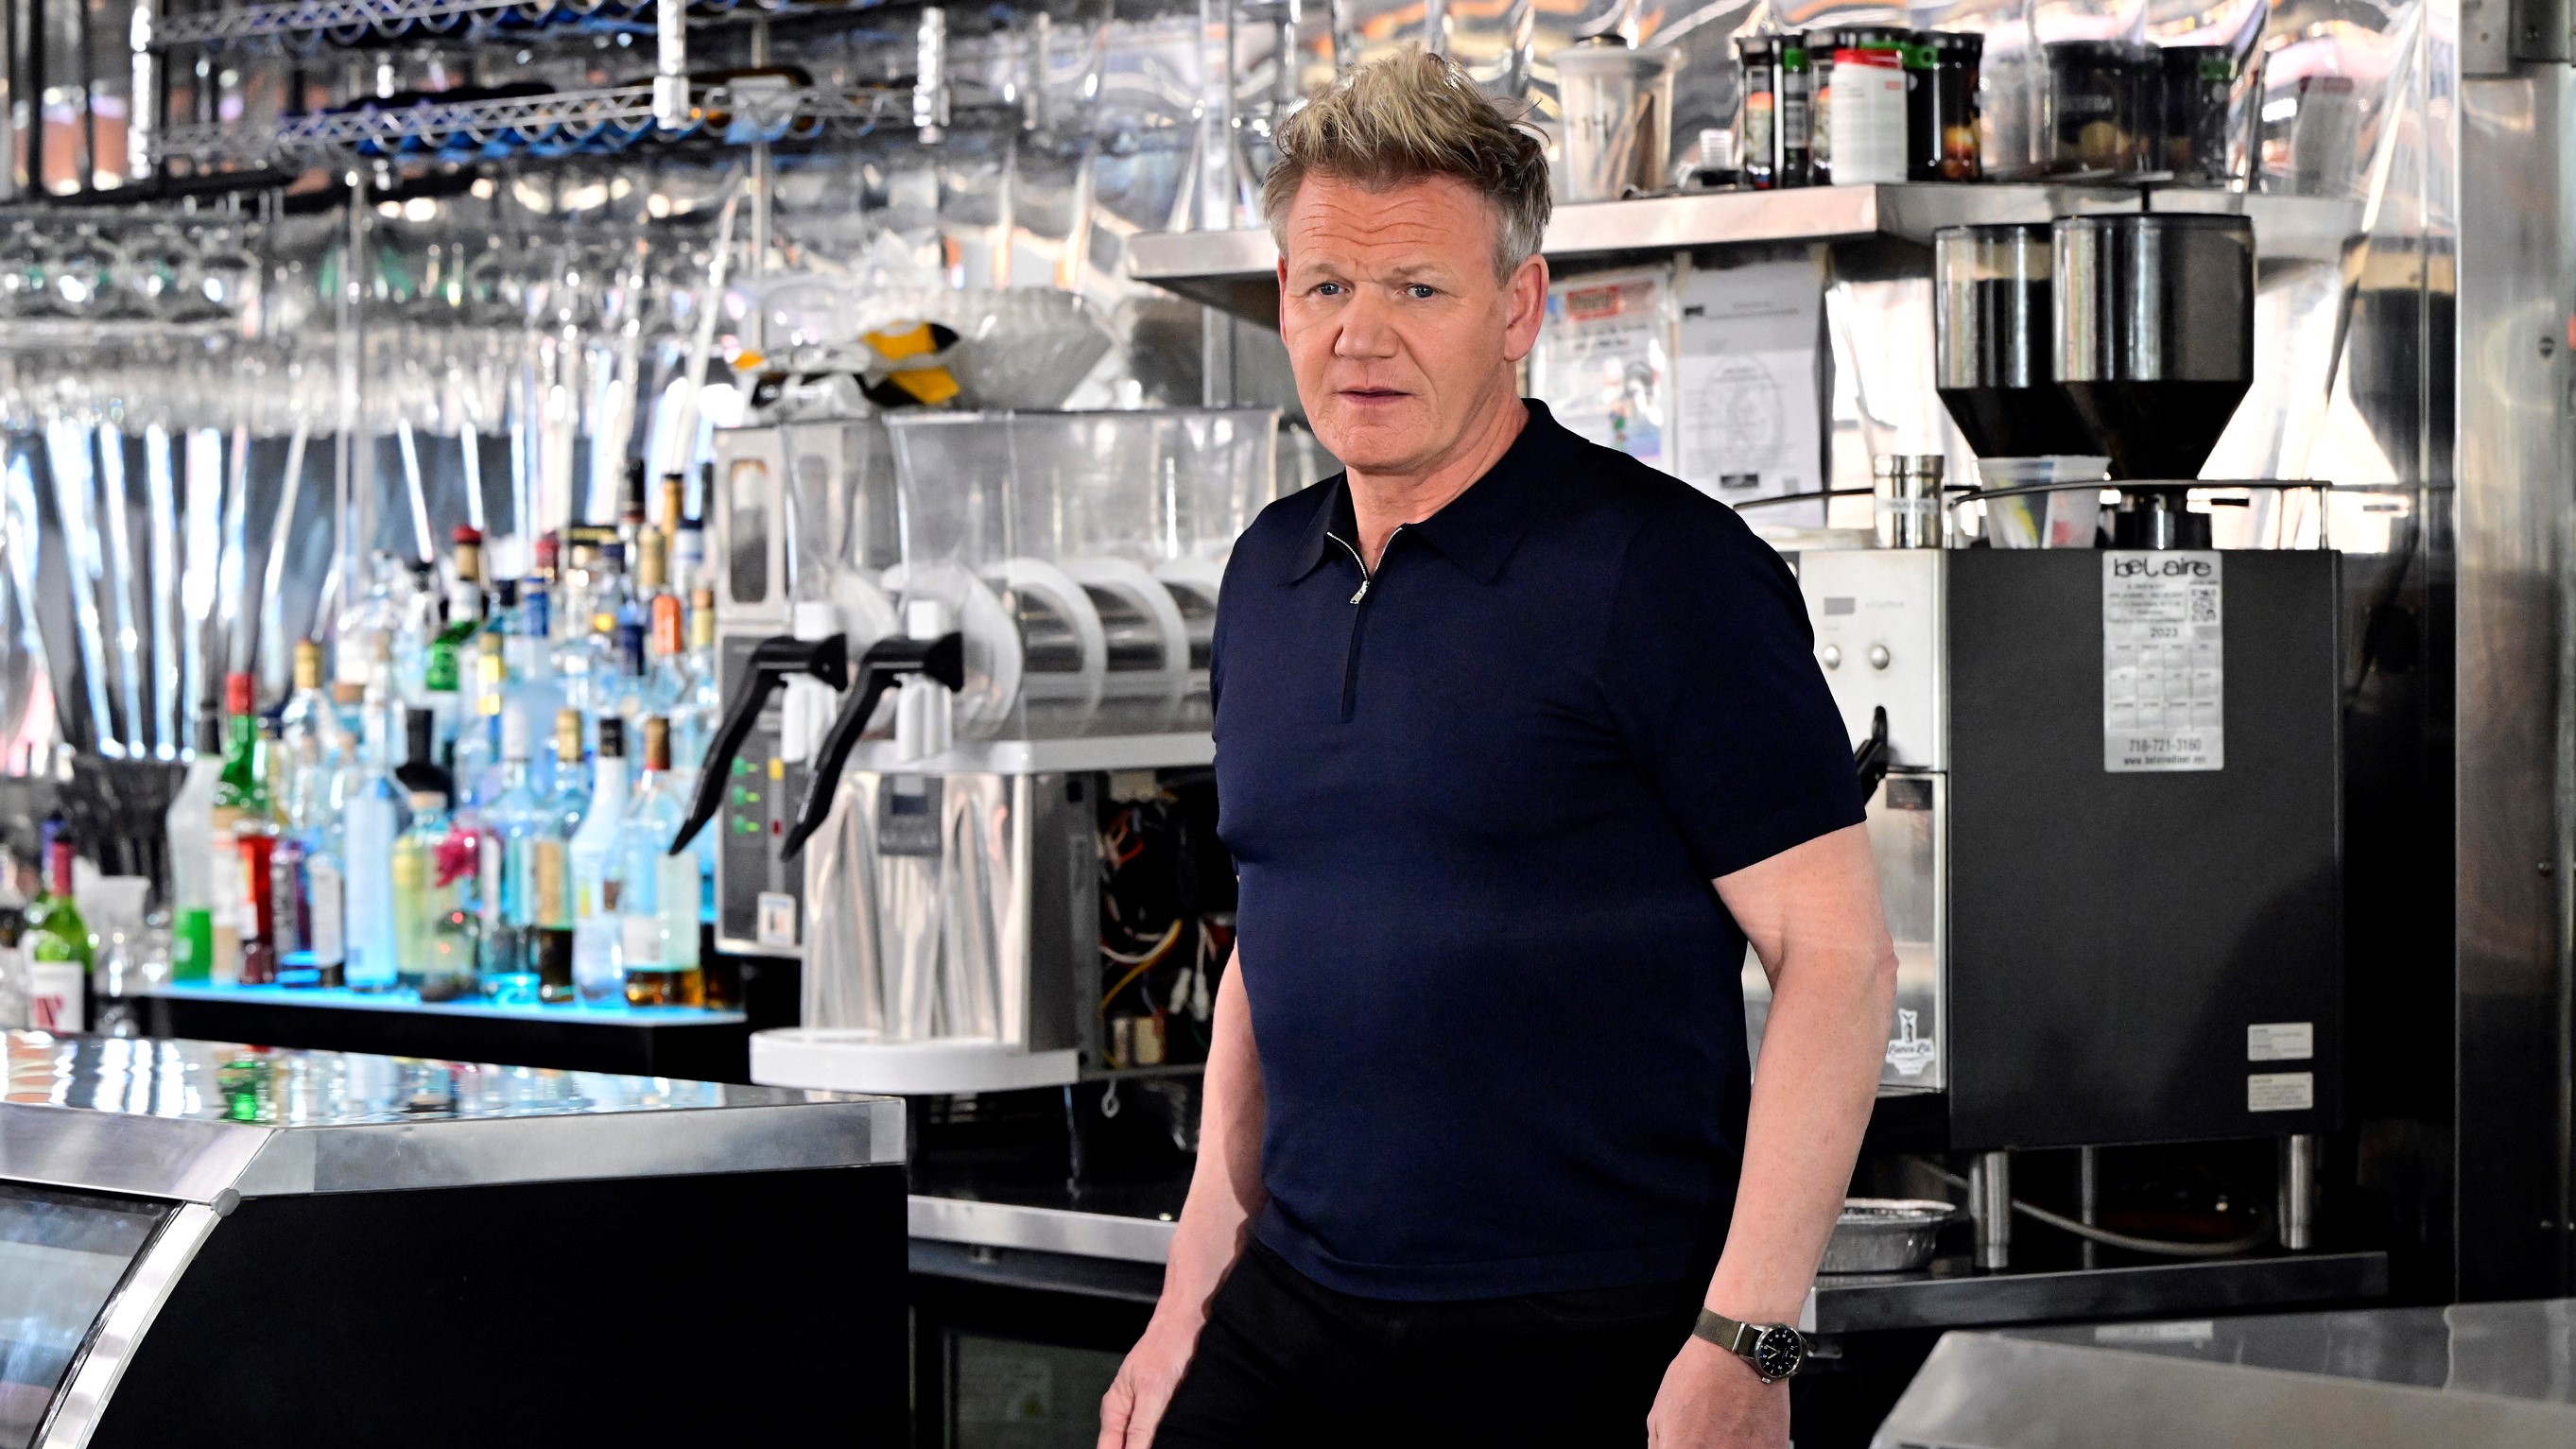 Kitchen Nightmares season 8 release date and what we know What to Watch